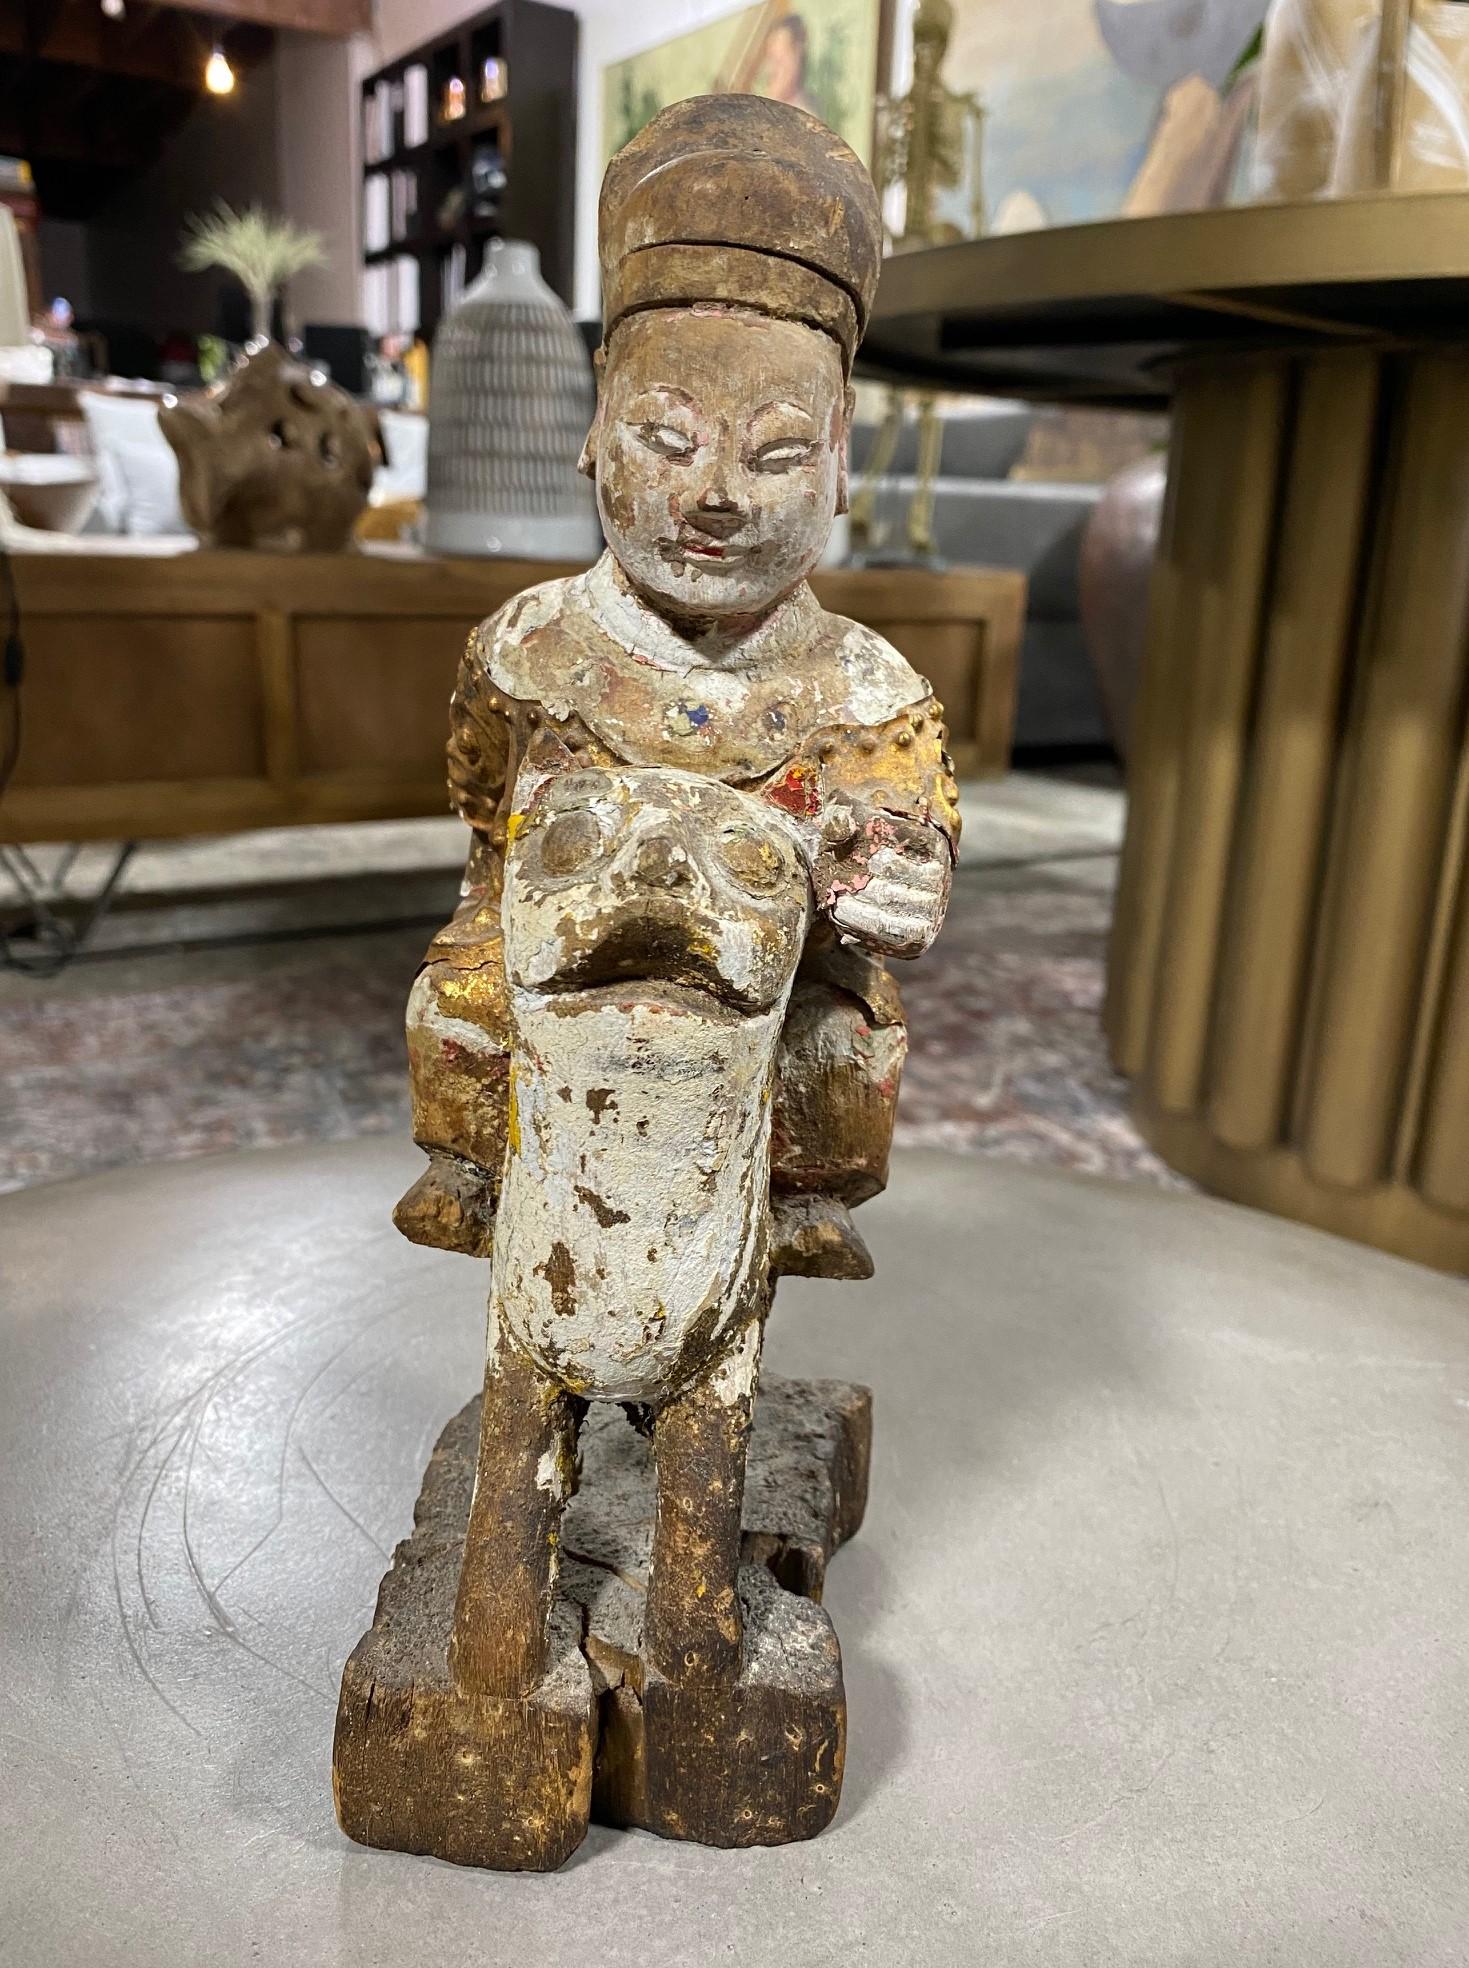 A fantastic wood and gilt decorated hand carved Chinese ancestral temple shrine Emperor figure riding a mythical beast - perhaps a tiger. 

From a collection of Chinese and Asian artifacts. 

We are listing it as 19th century but could be